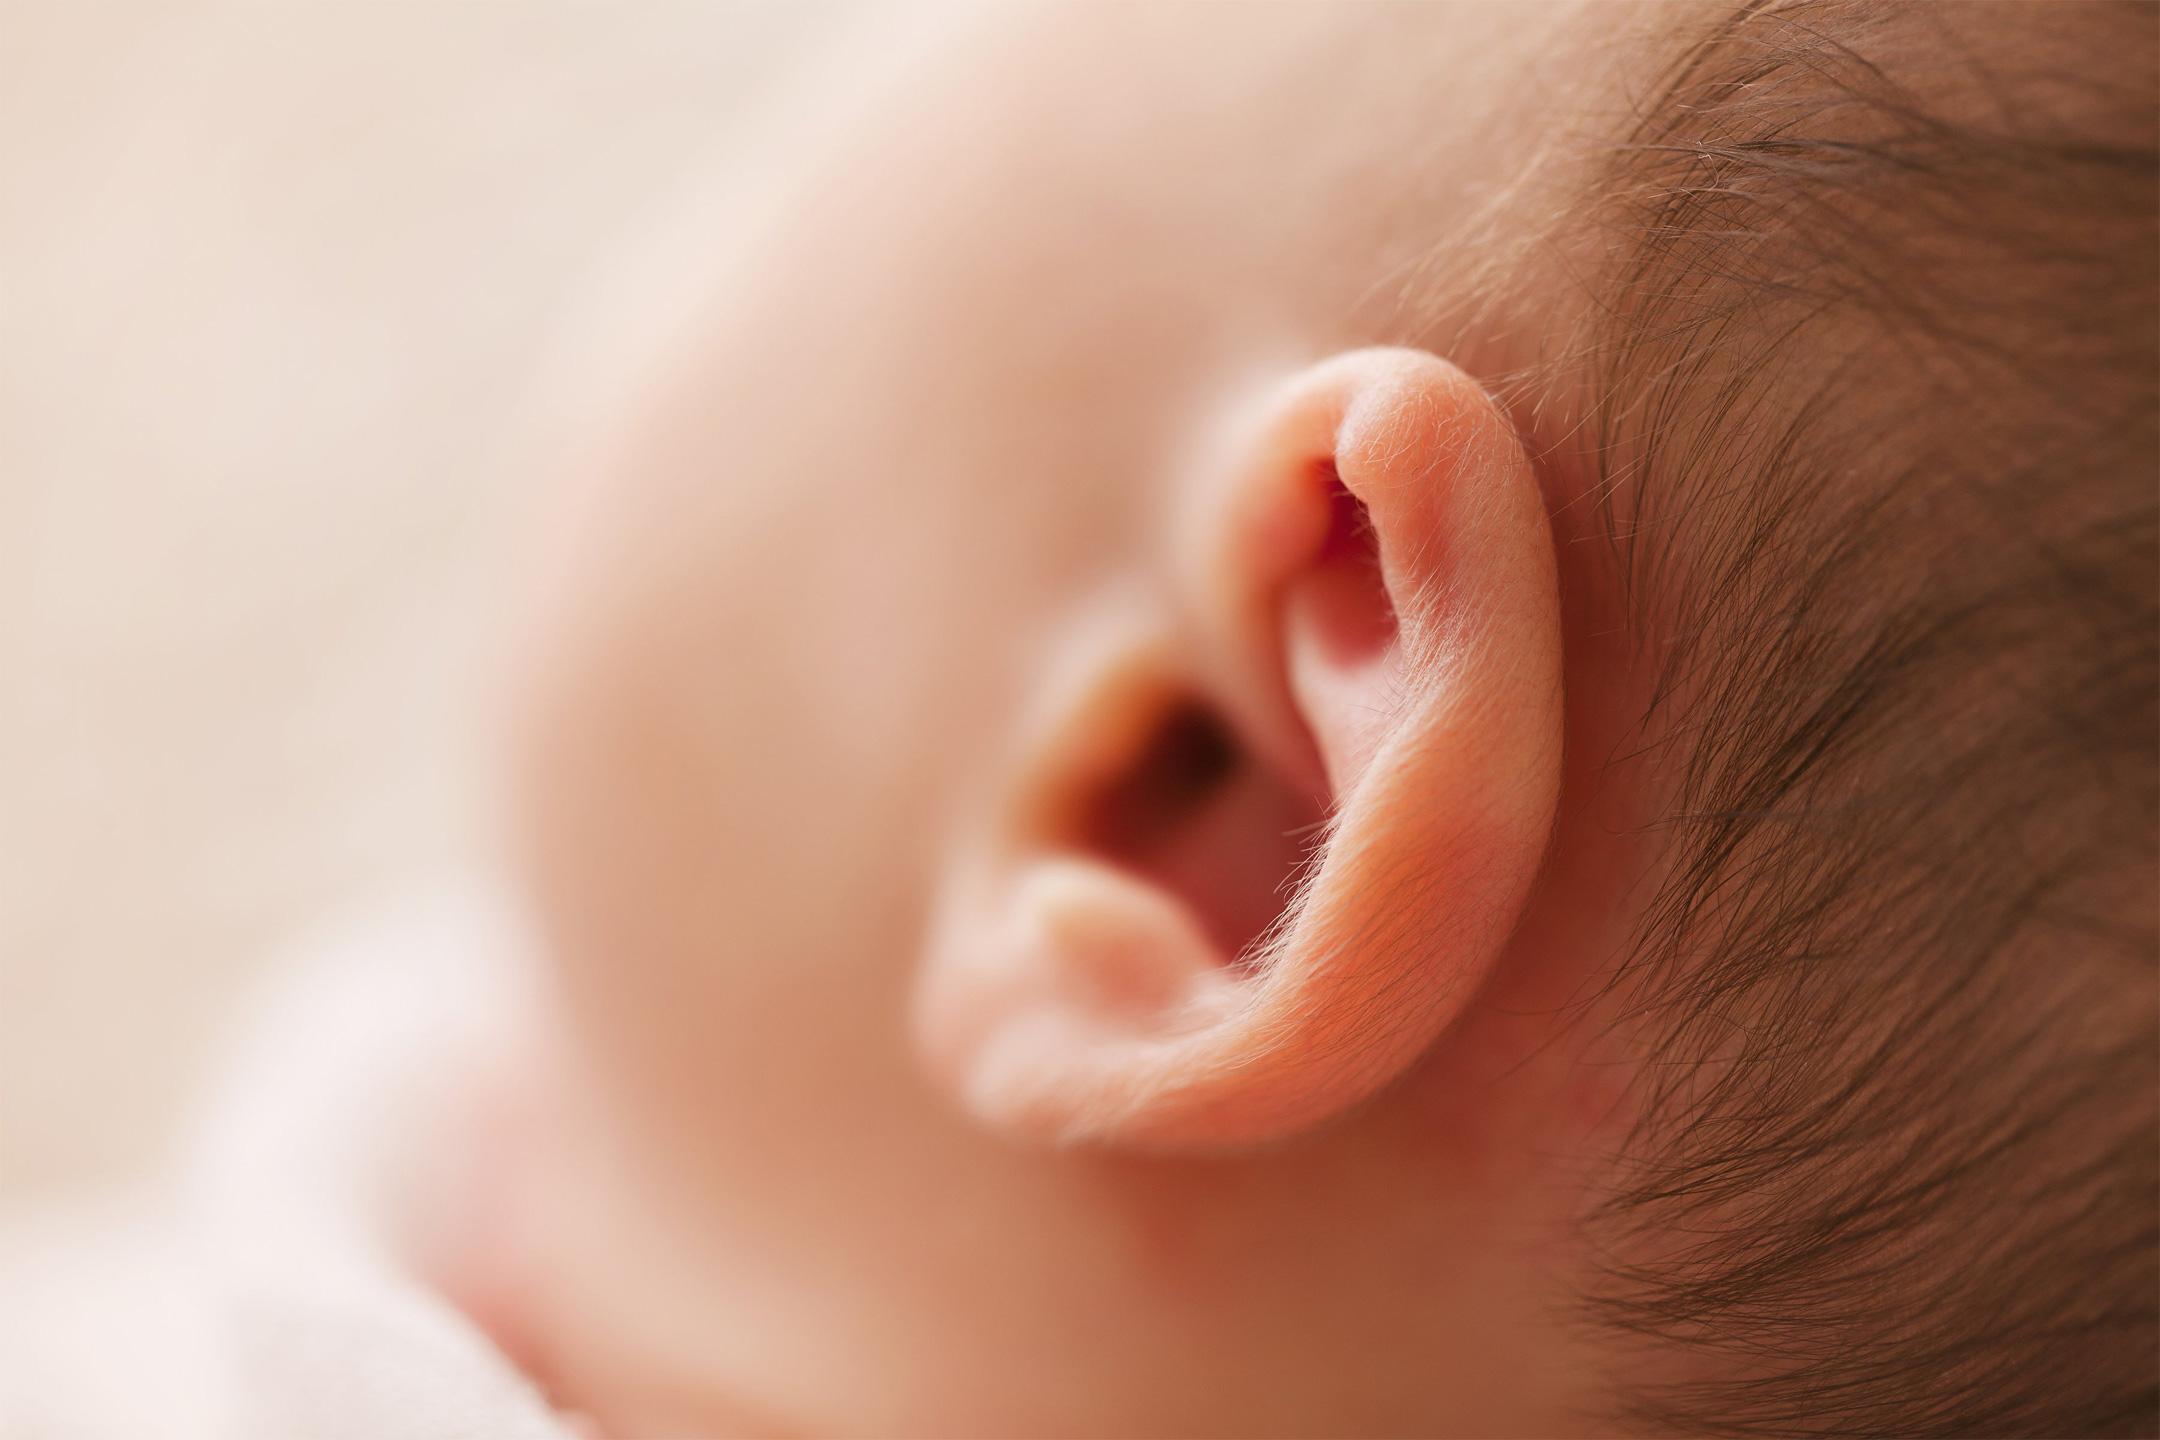 childs-ear2160